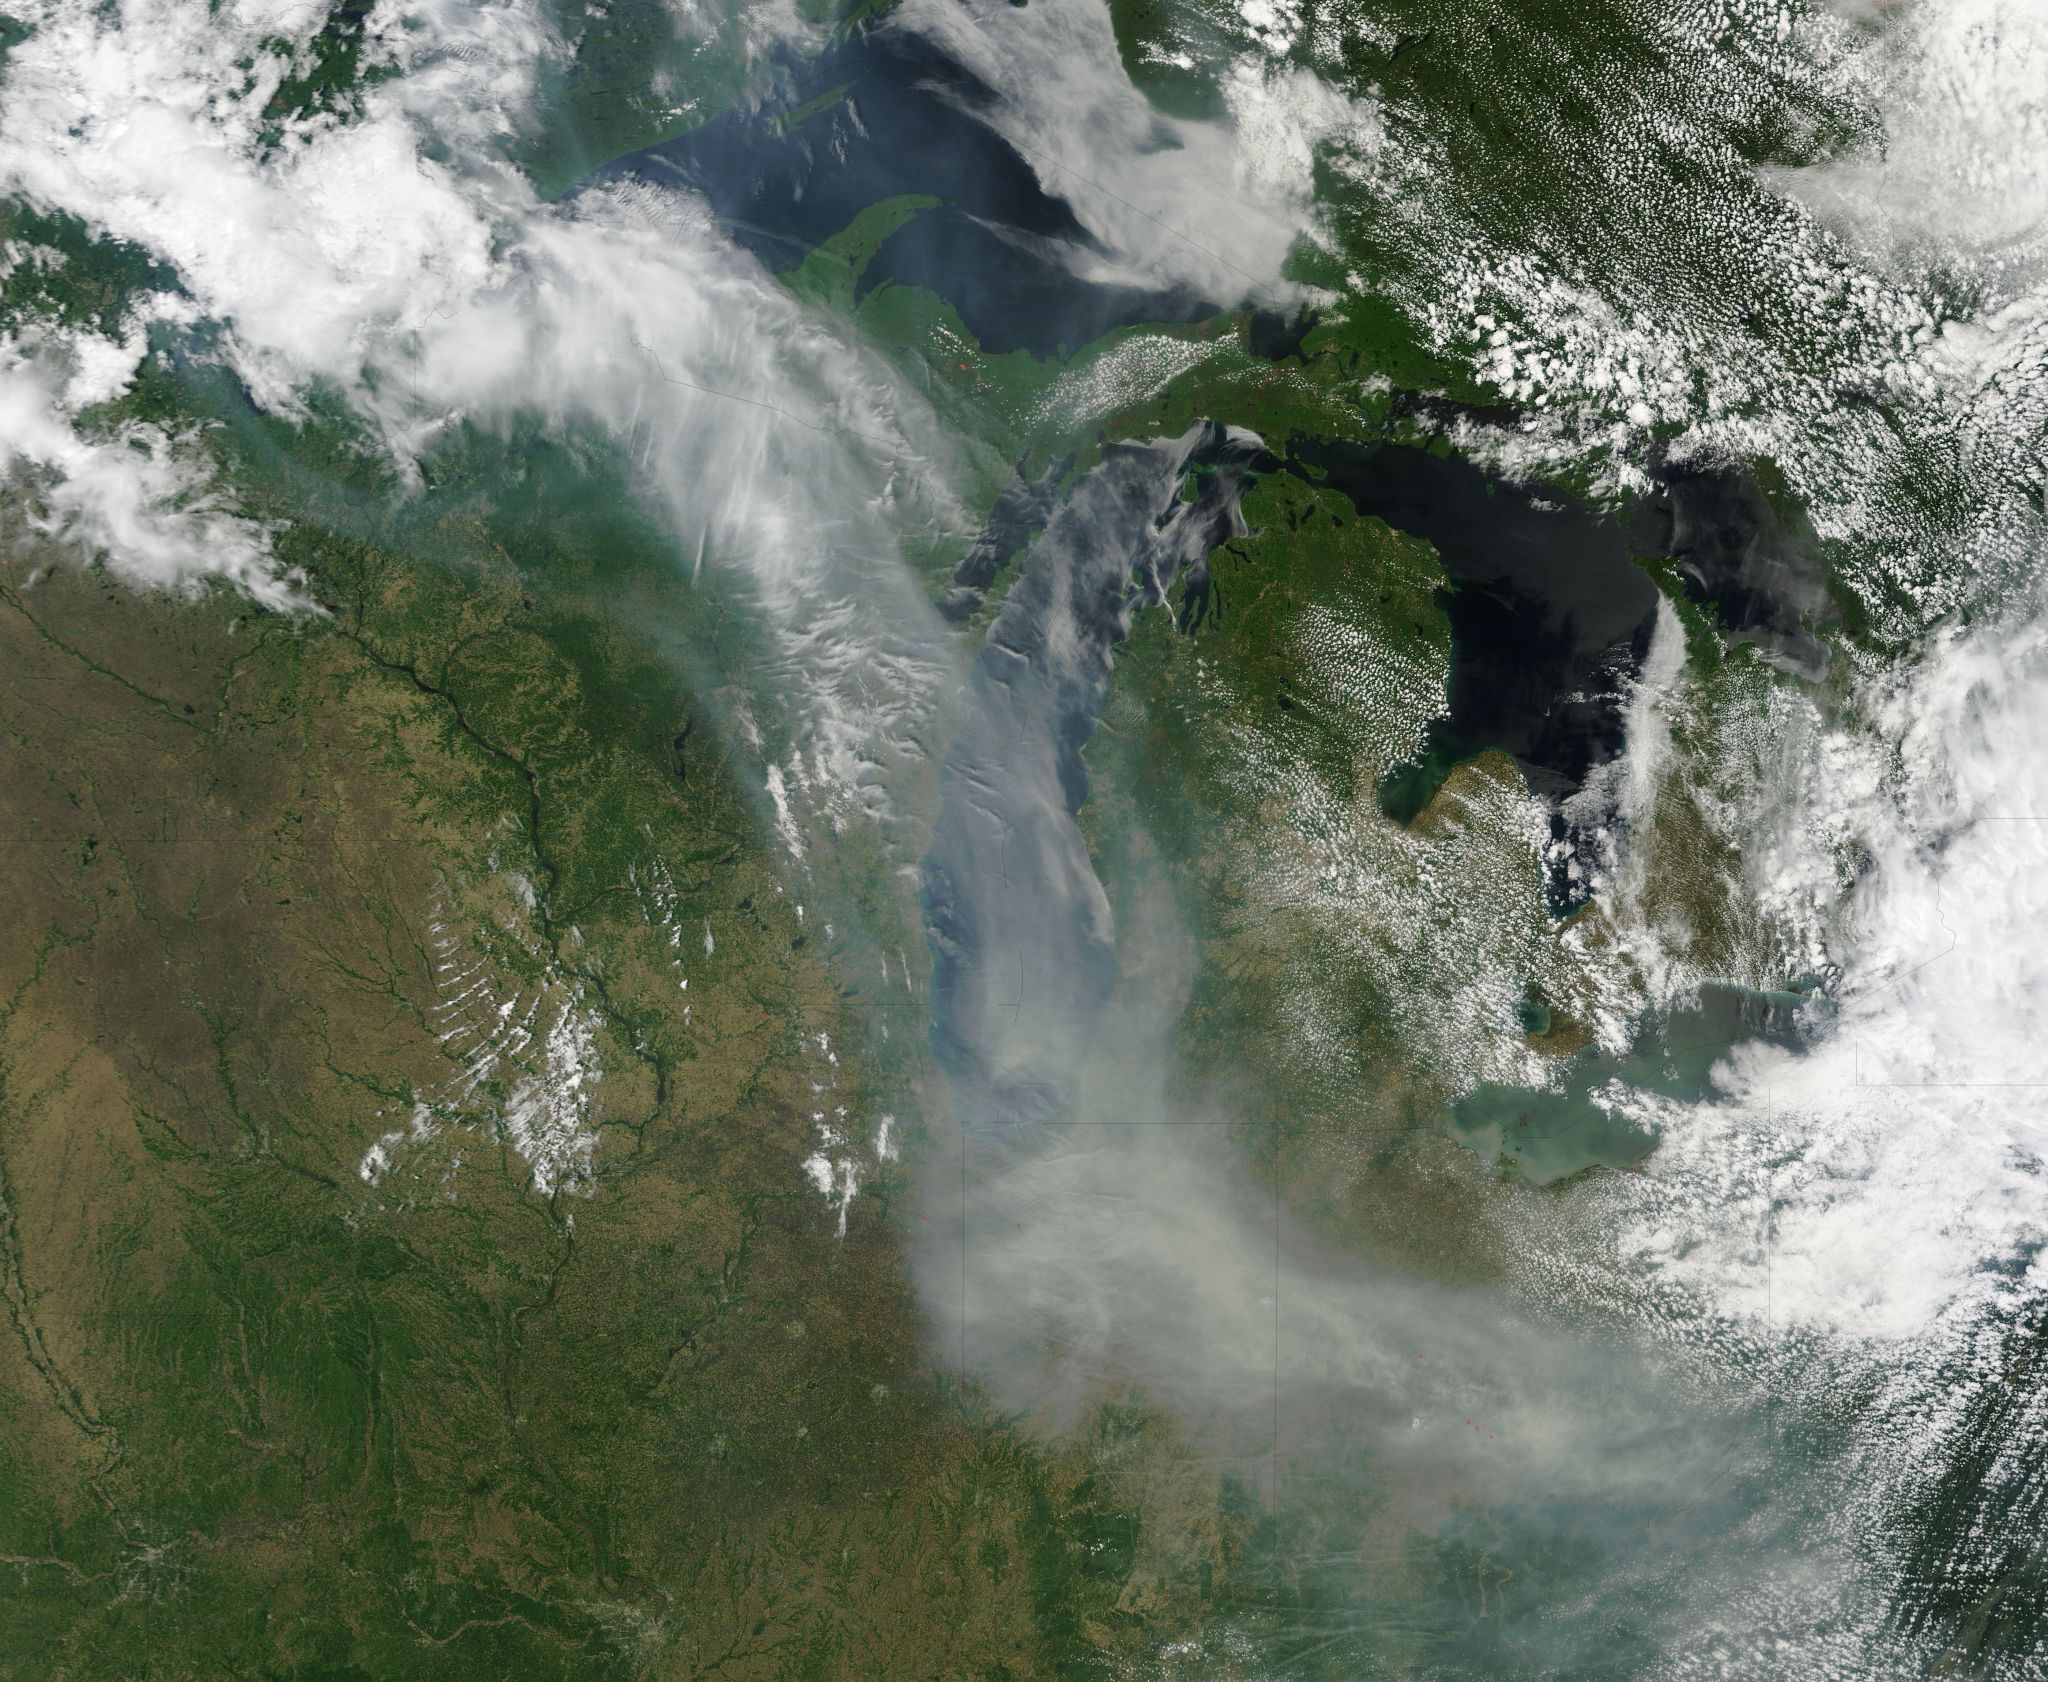 A satellite view shows the greens and orange browns of land in the Midwest of the United States. The land, split up by dark blue lakes at the top of the image, also has thin twisting rivers snaking through it. The land and water take up the background of the image. In the foreground are wisps of white clouds and gray smoke. Clouds are seen in the top left corner of the image and alone the right side of the image. The smoke trails from the top left of the image to the bottom right, and the land can be seen through the smoky plumes.